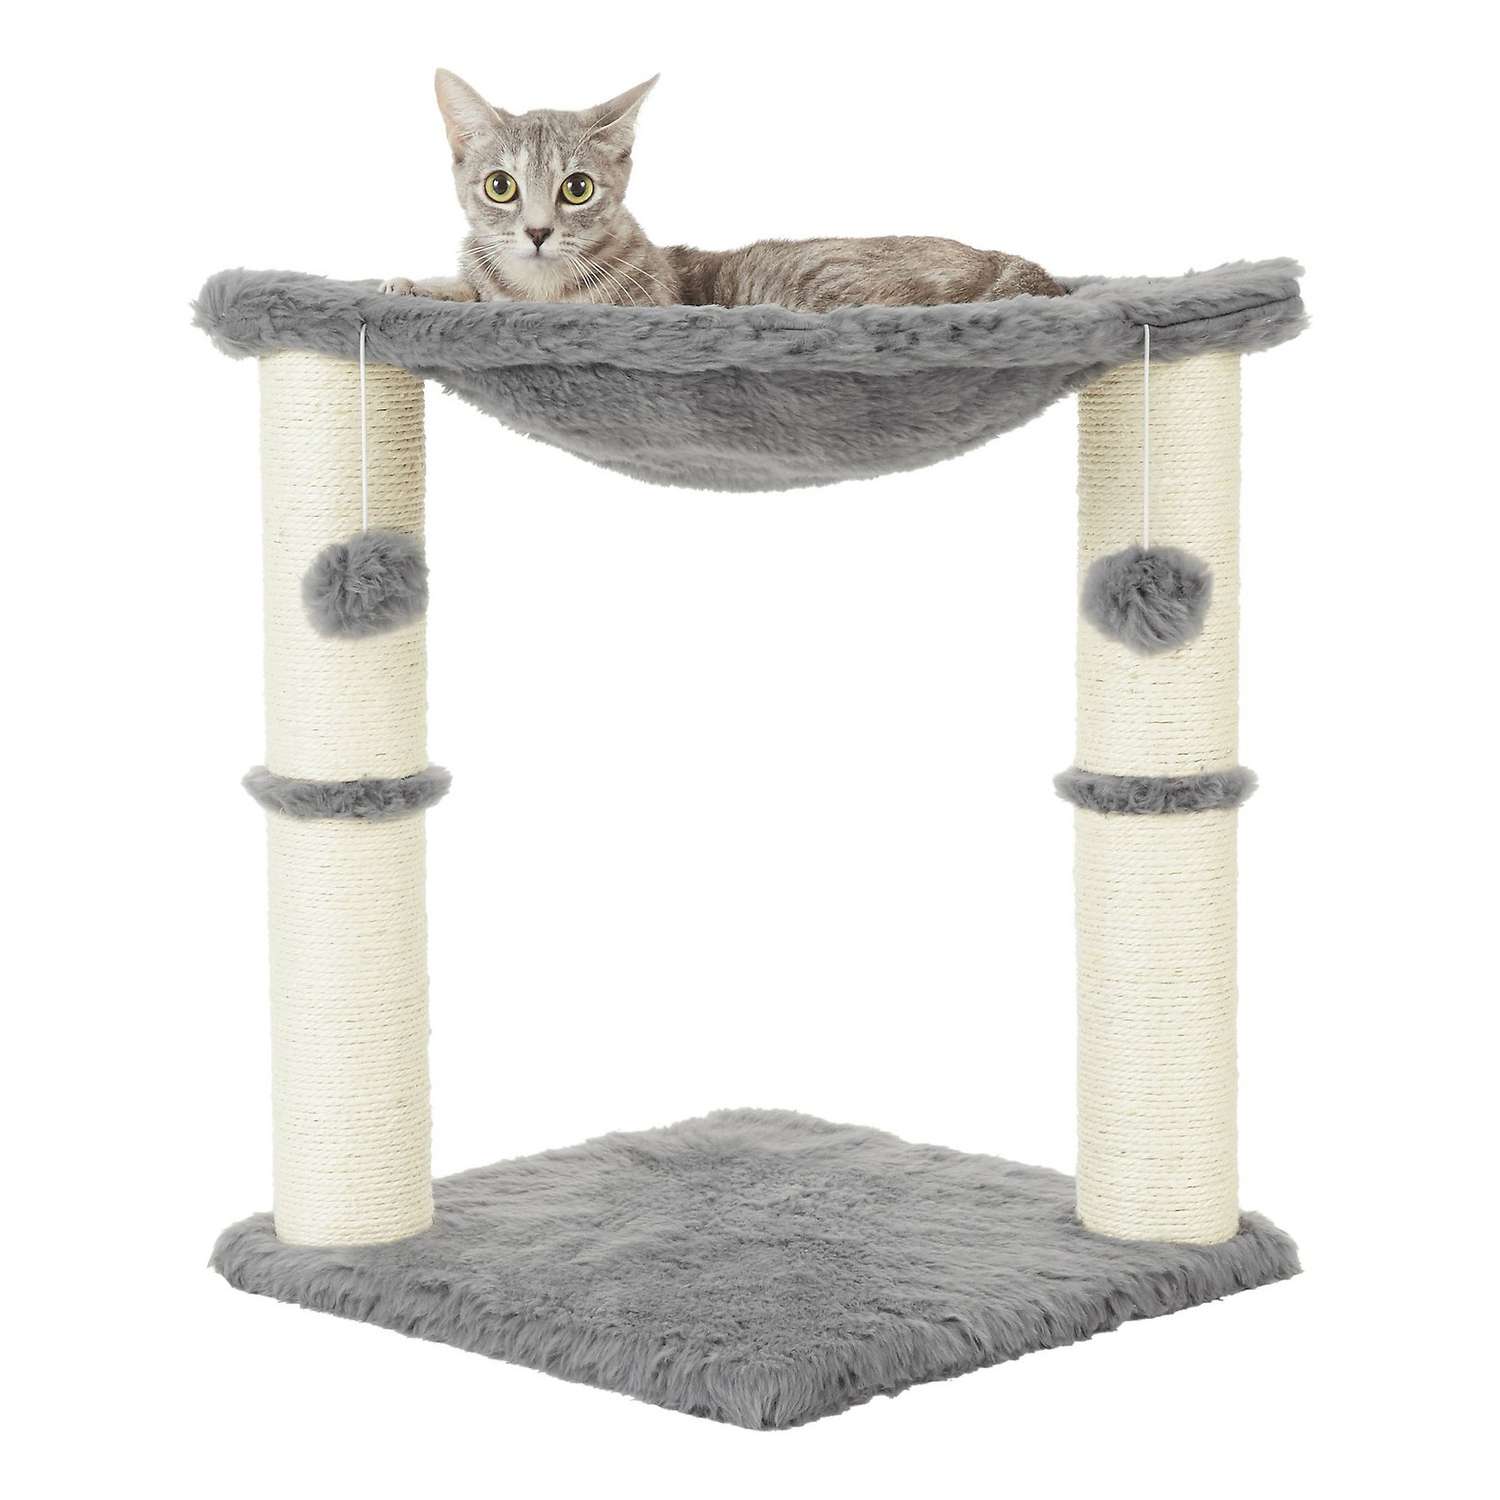 CatastrophiCreations Hammock Lounger Handcrafted Wall-Mounted Cat Furniture Renewed 